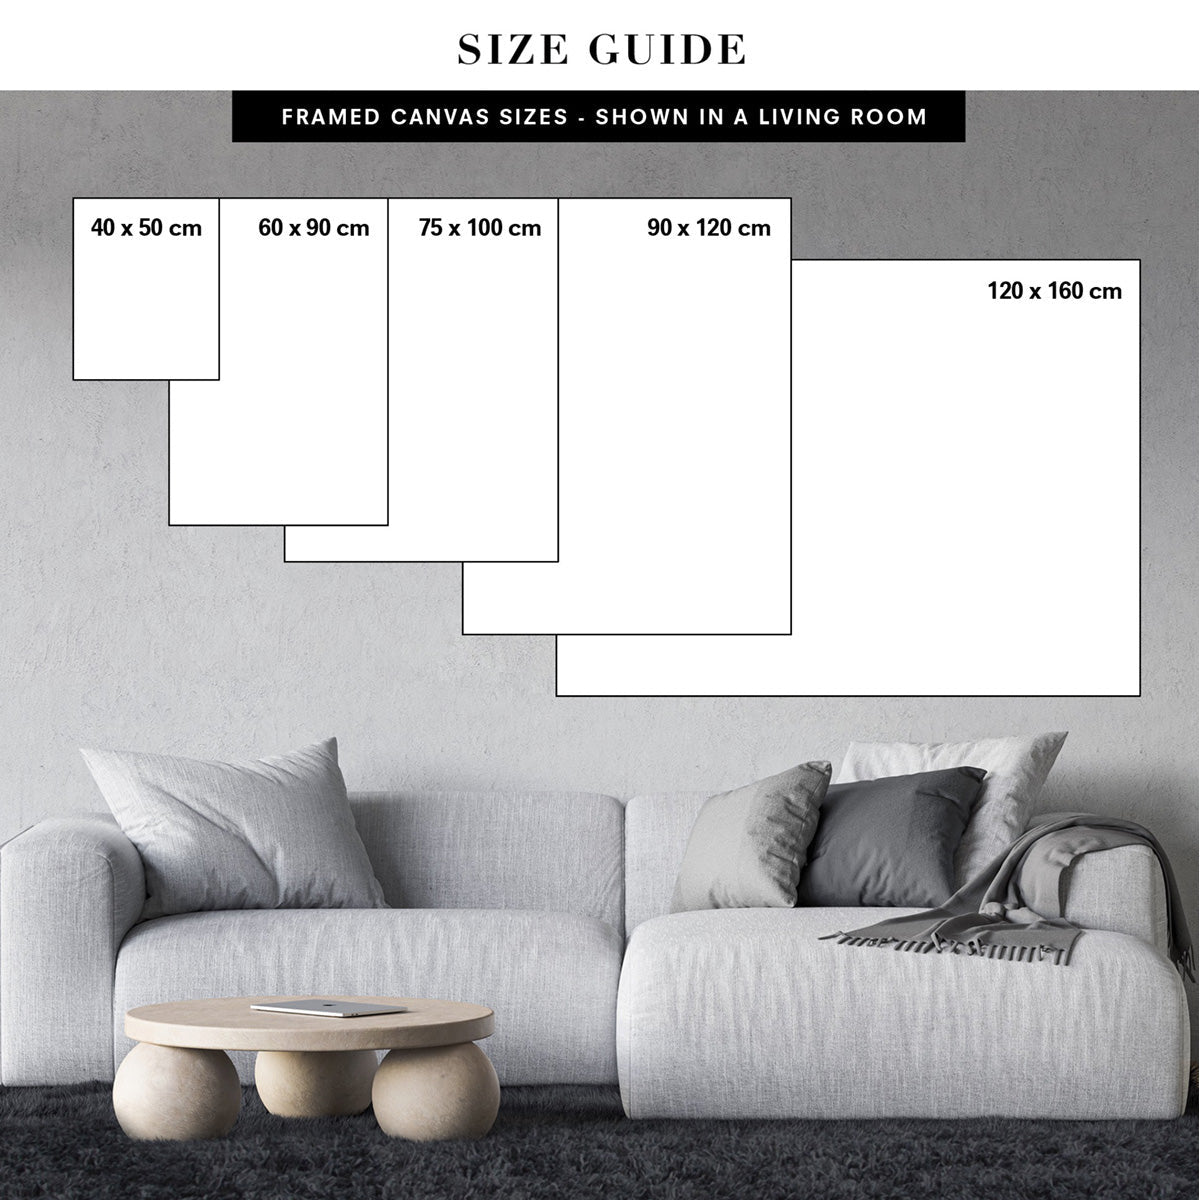 Framed Canvas size guide